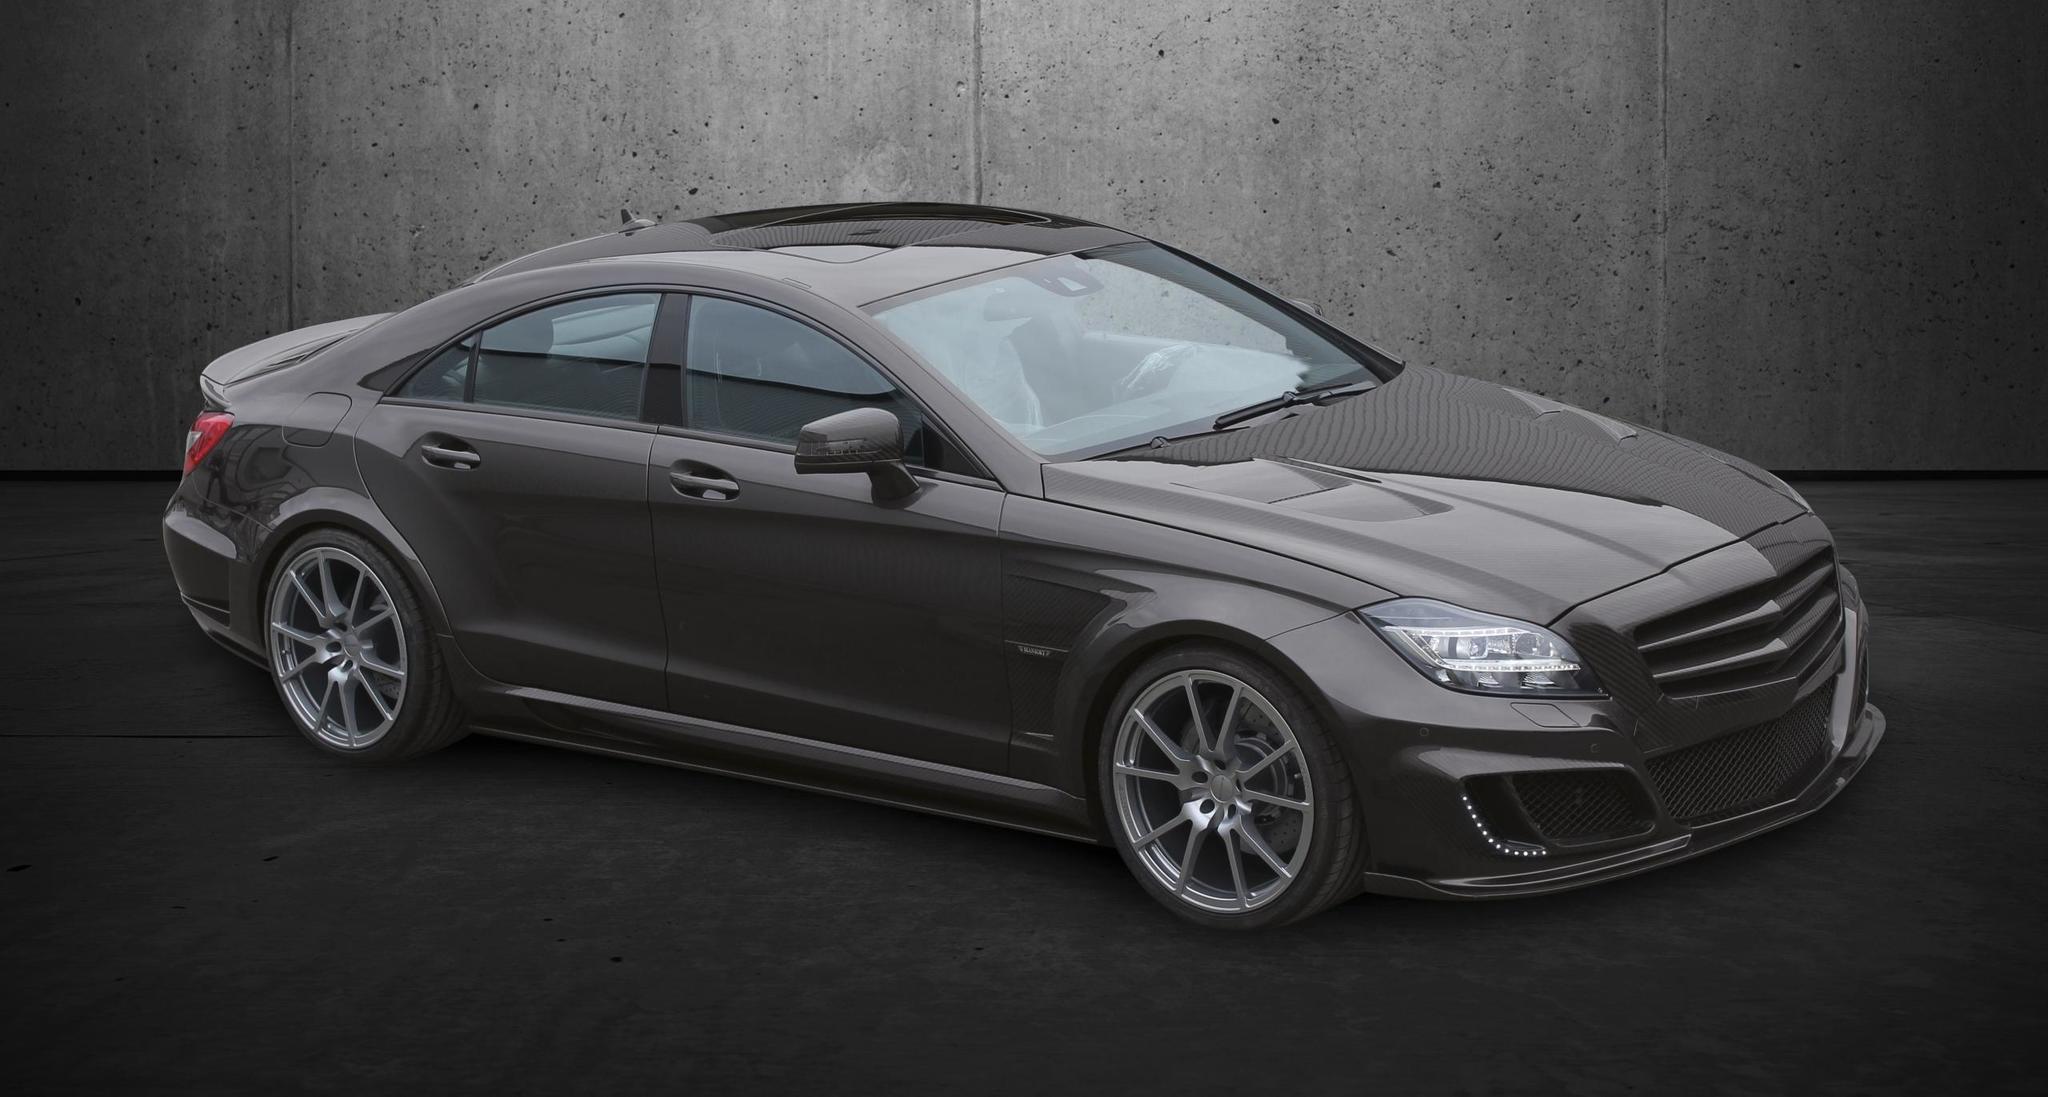 Mansory body kit for Mercedes-Benz CLS latest model